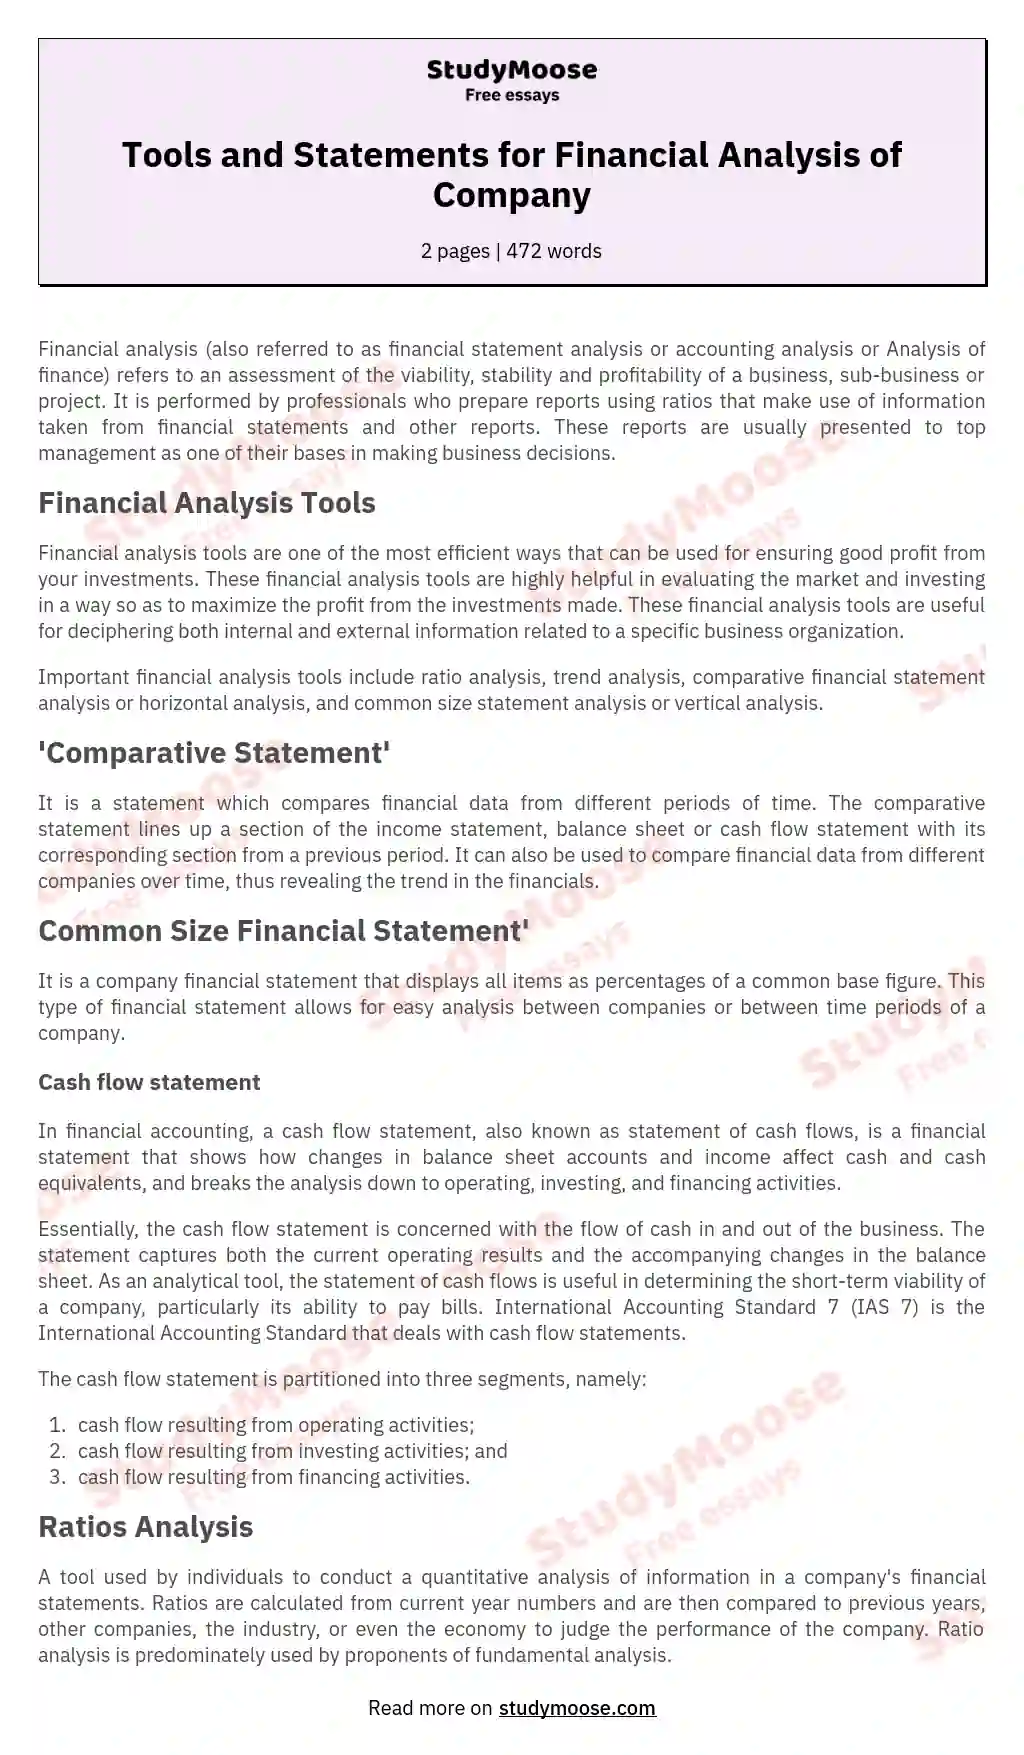 Tools and Statements for Financial Analysis of Company essay